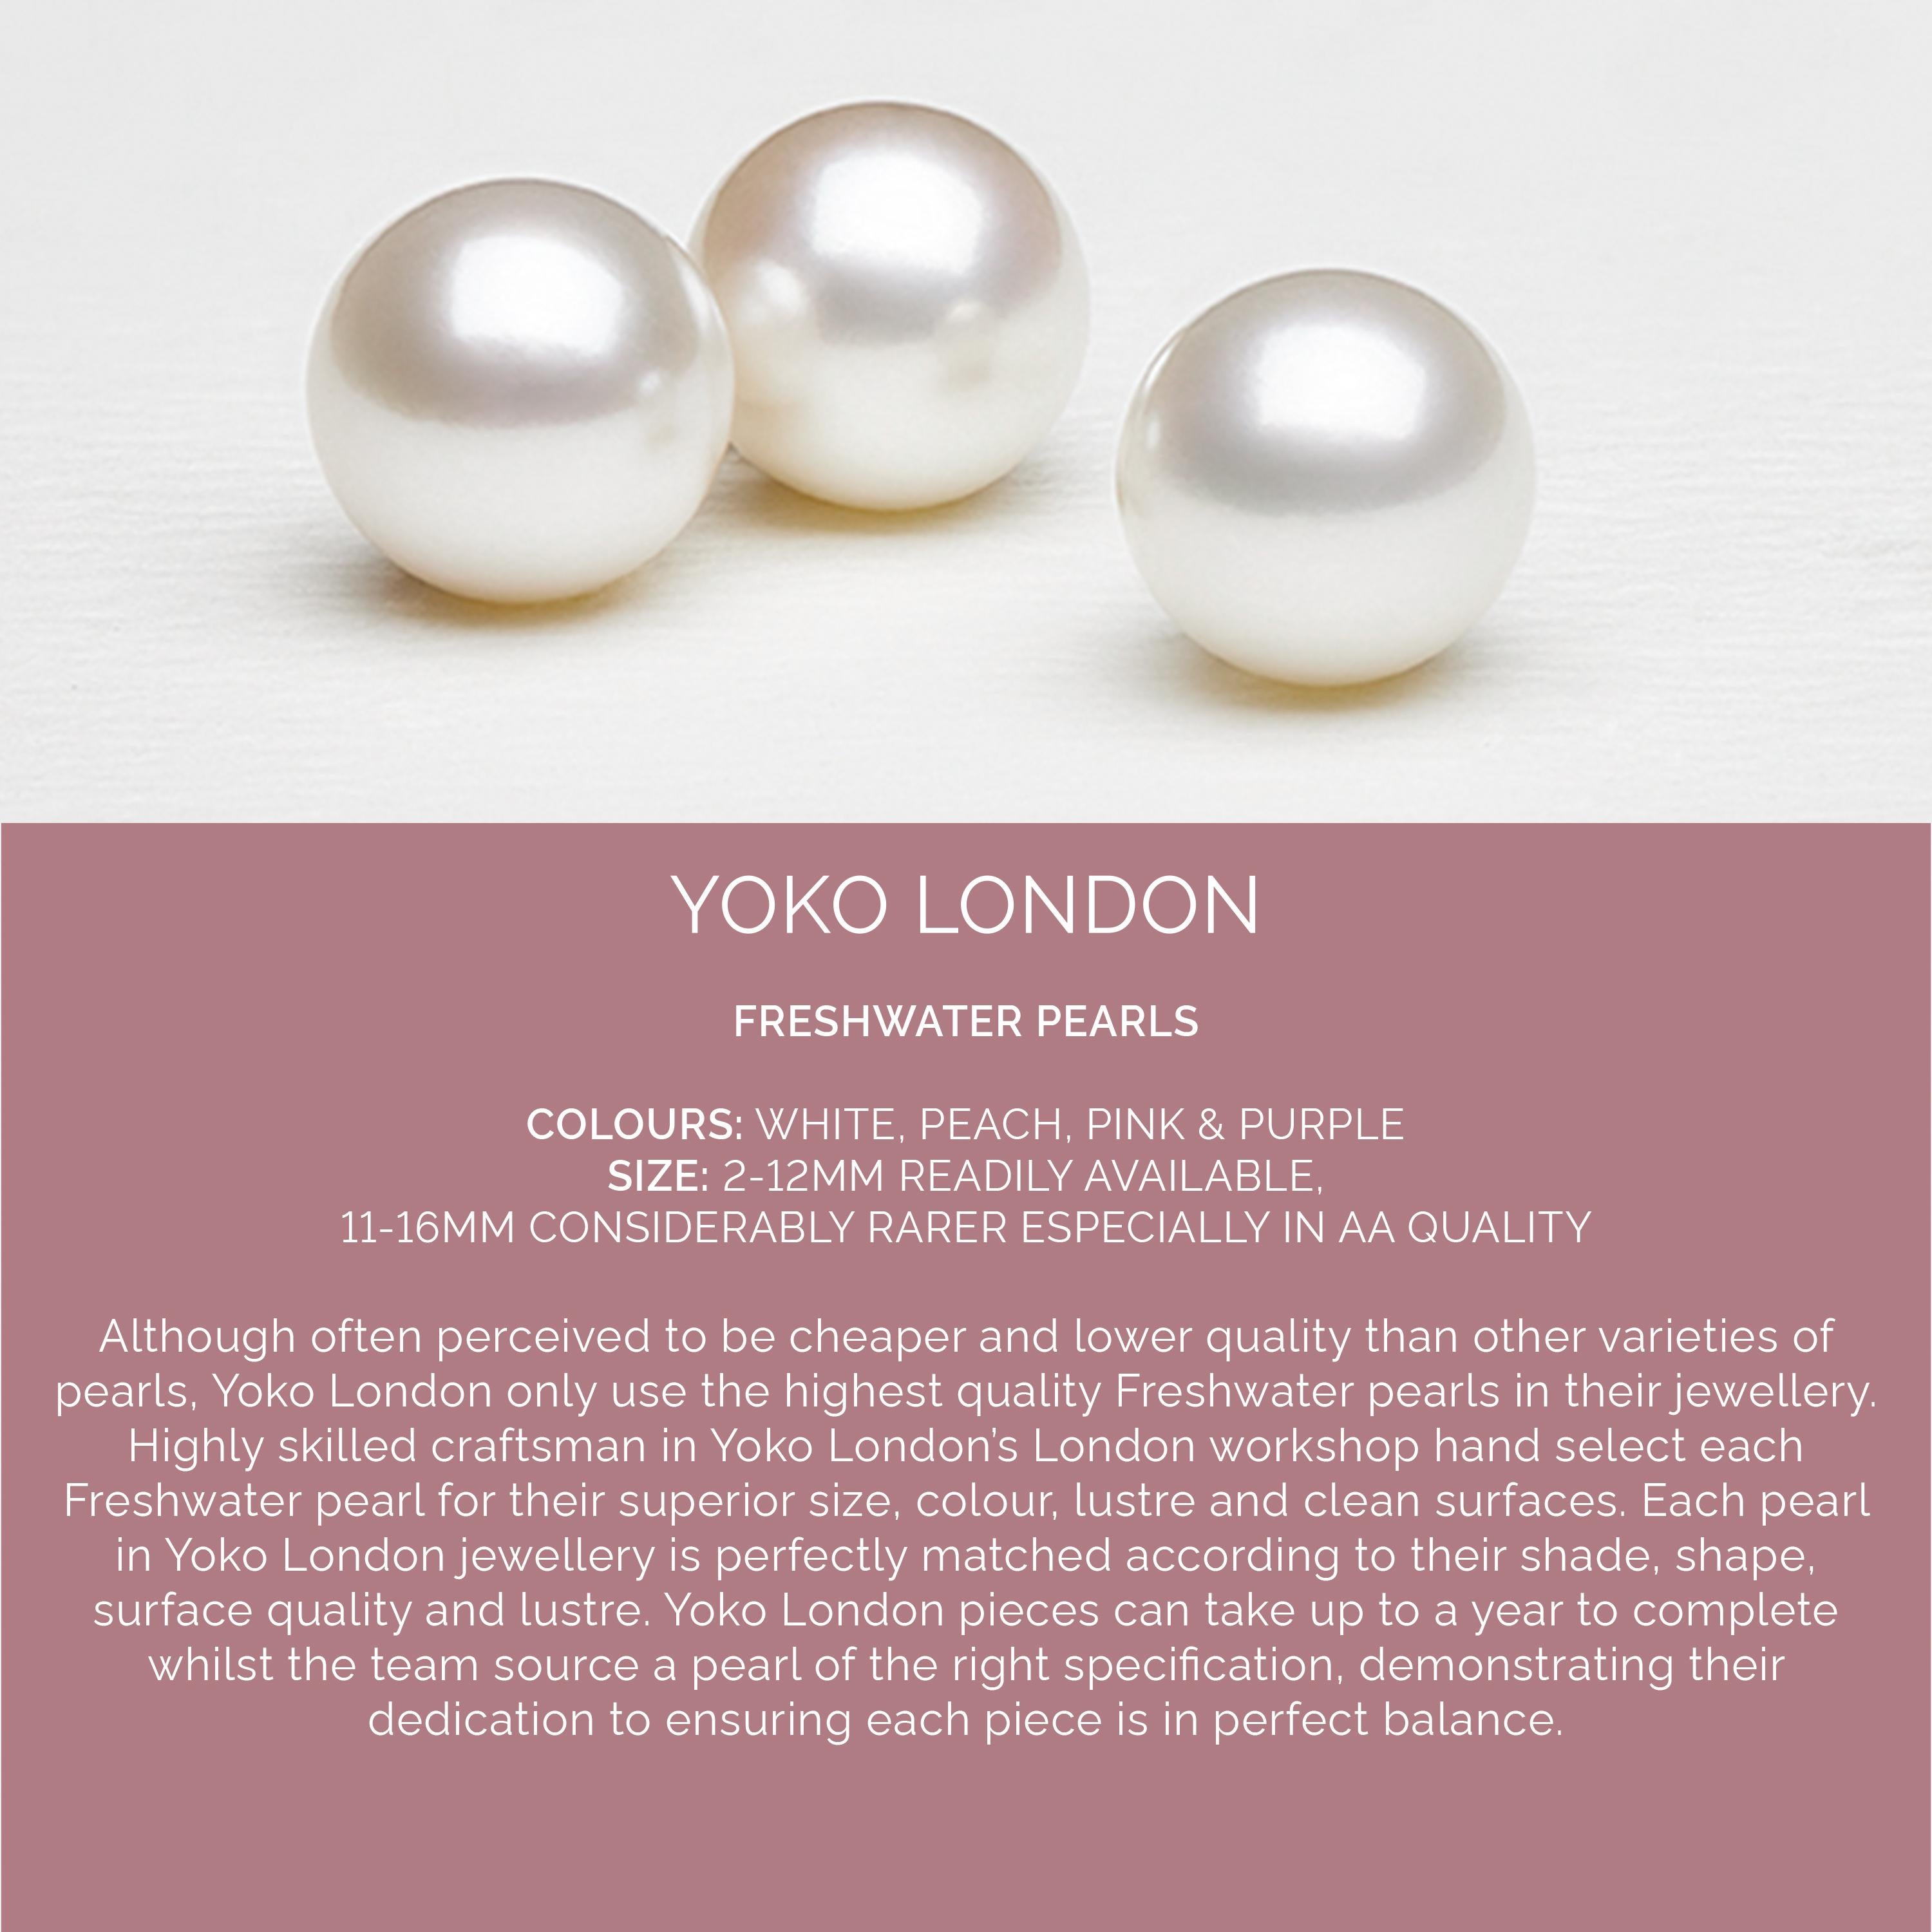 This timeless bracelet by Yoko London is an essential item for any jewellery collection. The bracelet is formed from high-quality Cultured Freshwater Pearls which have been matched and strung by hand in our London atelier. Perfect for adding a touch